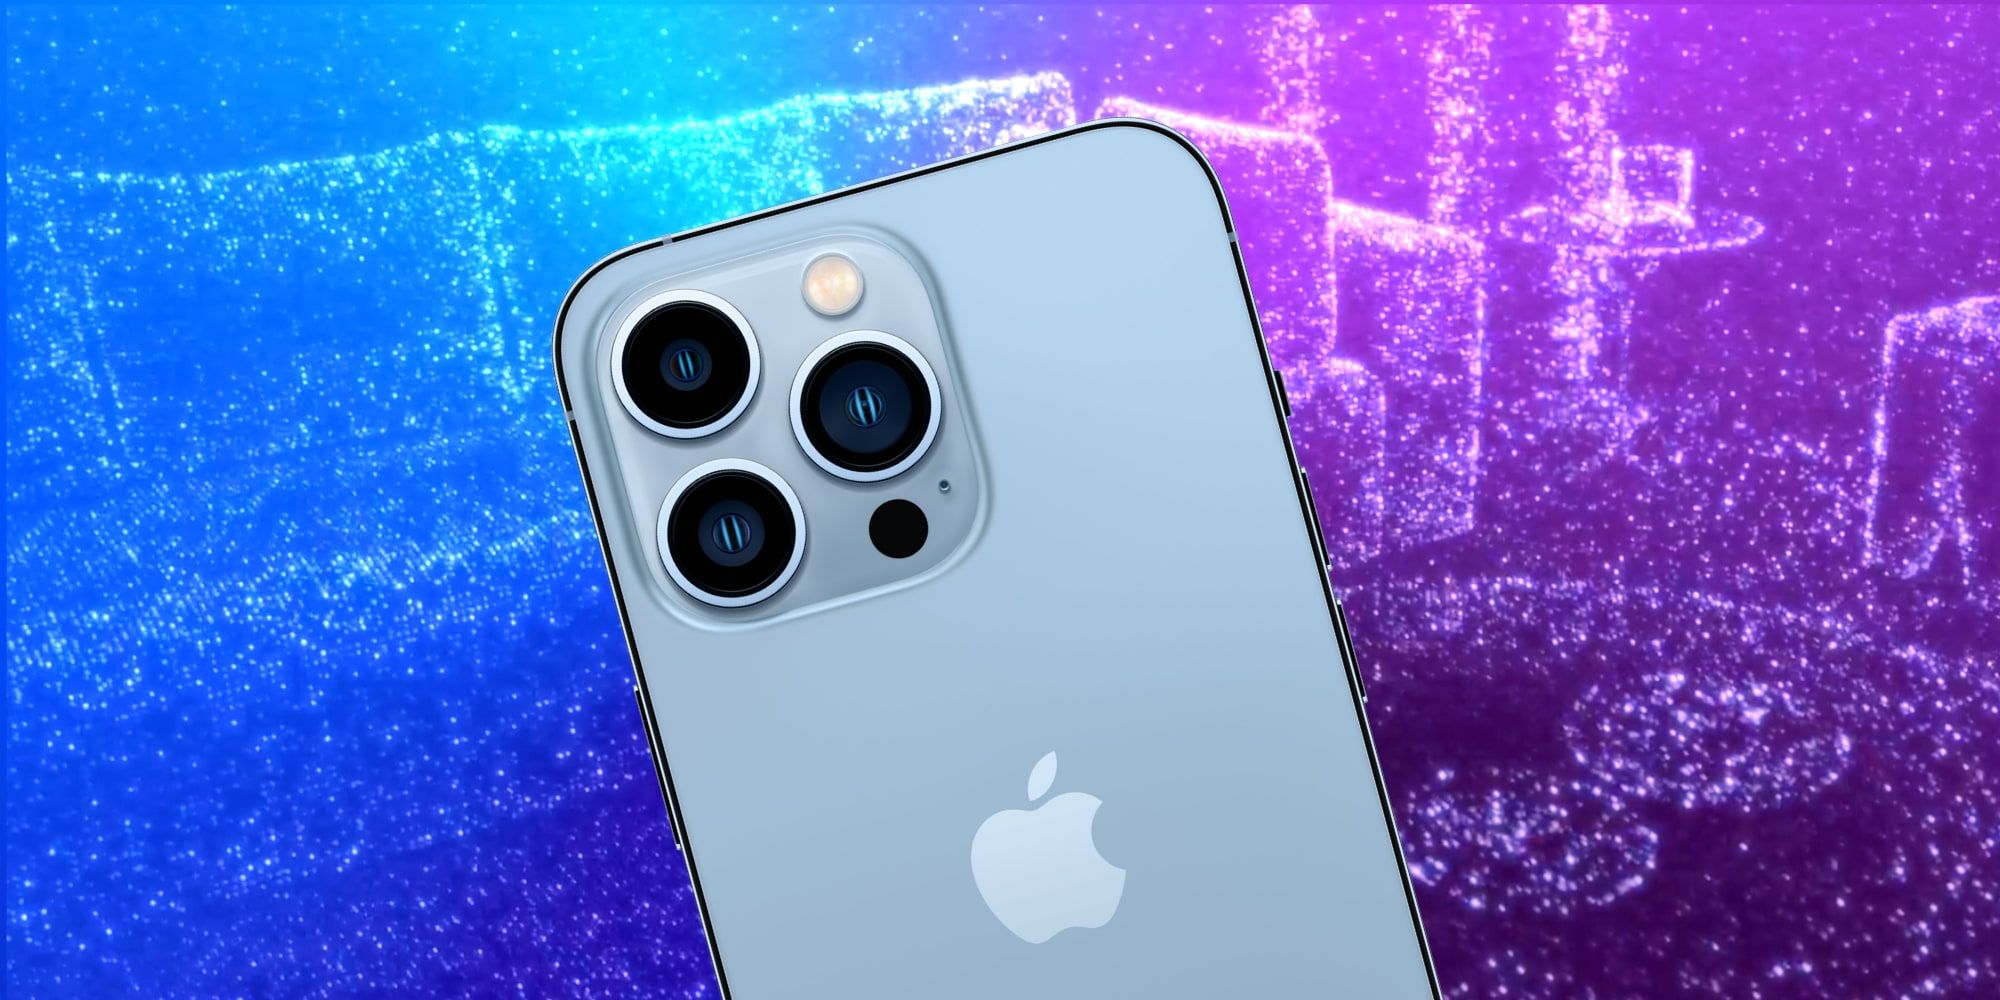 How The iPhone 13 Pro Max's Cameras & LiDAR See The World